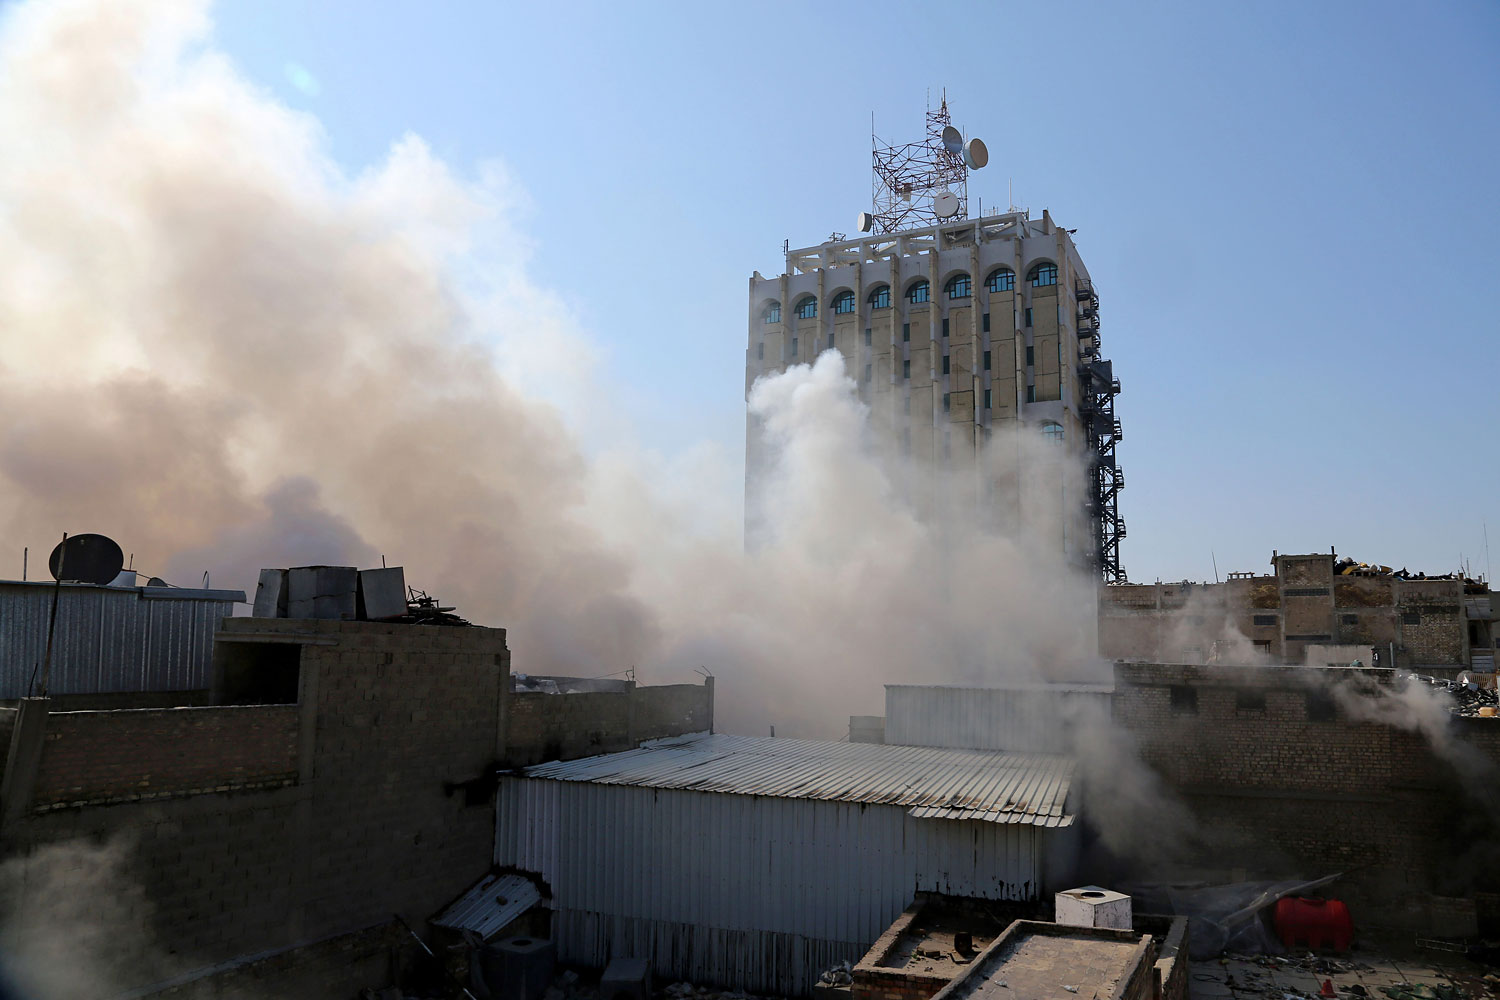 Smoke rises after a parked car bomb went off at a commercial center in Khilani Square in central Baghdad, Feb. 5, 2014. (Karim Kadim / AP)